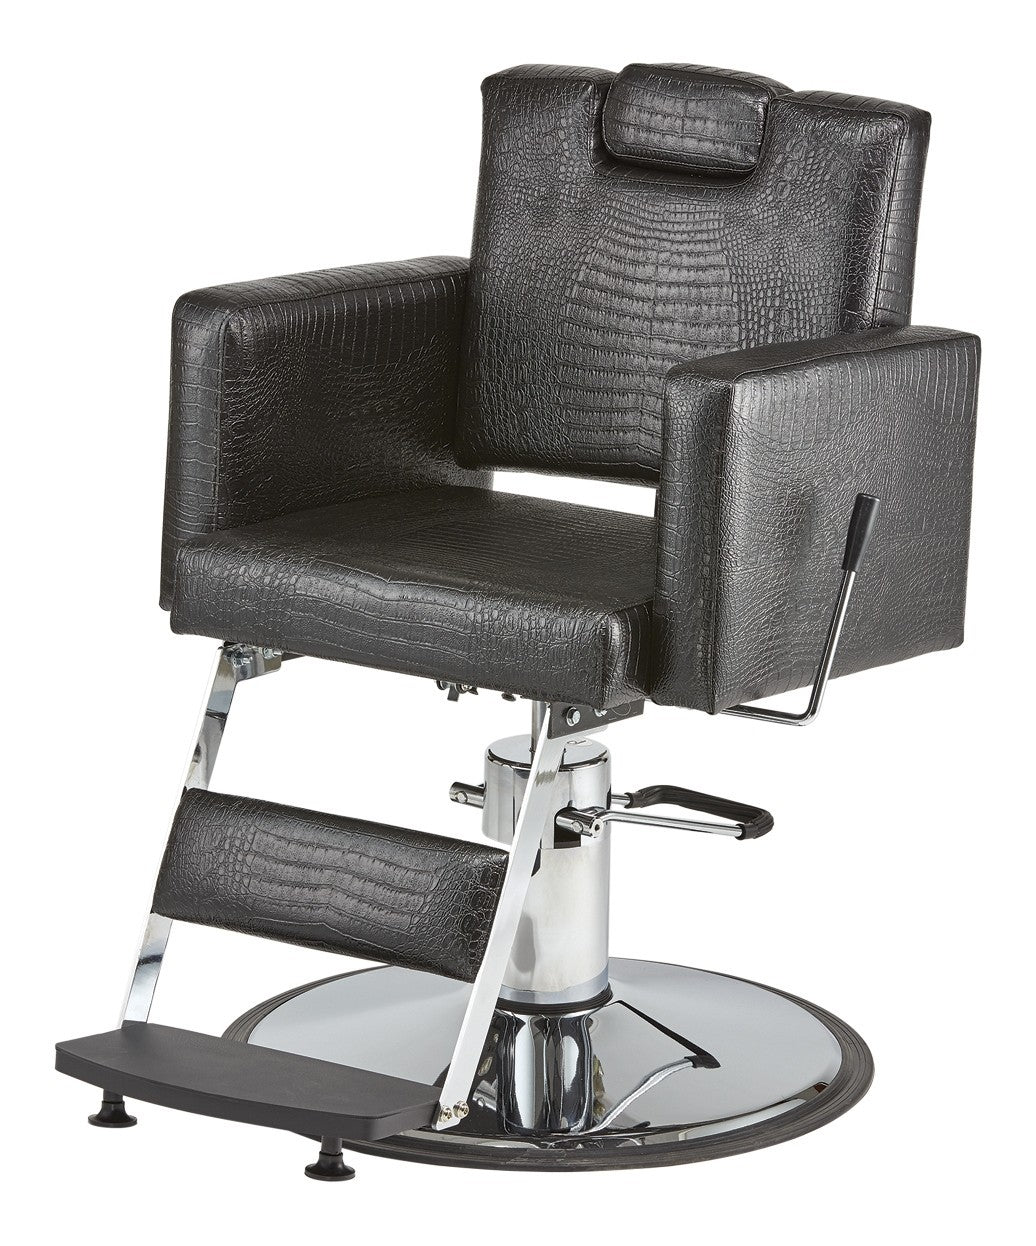 Pibbs 3491 Cosmo Barber Chair